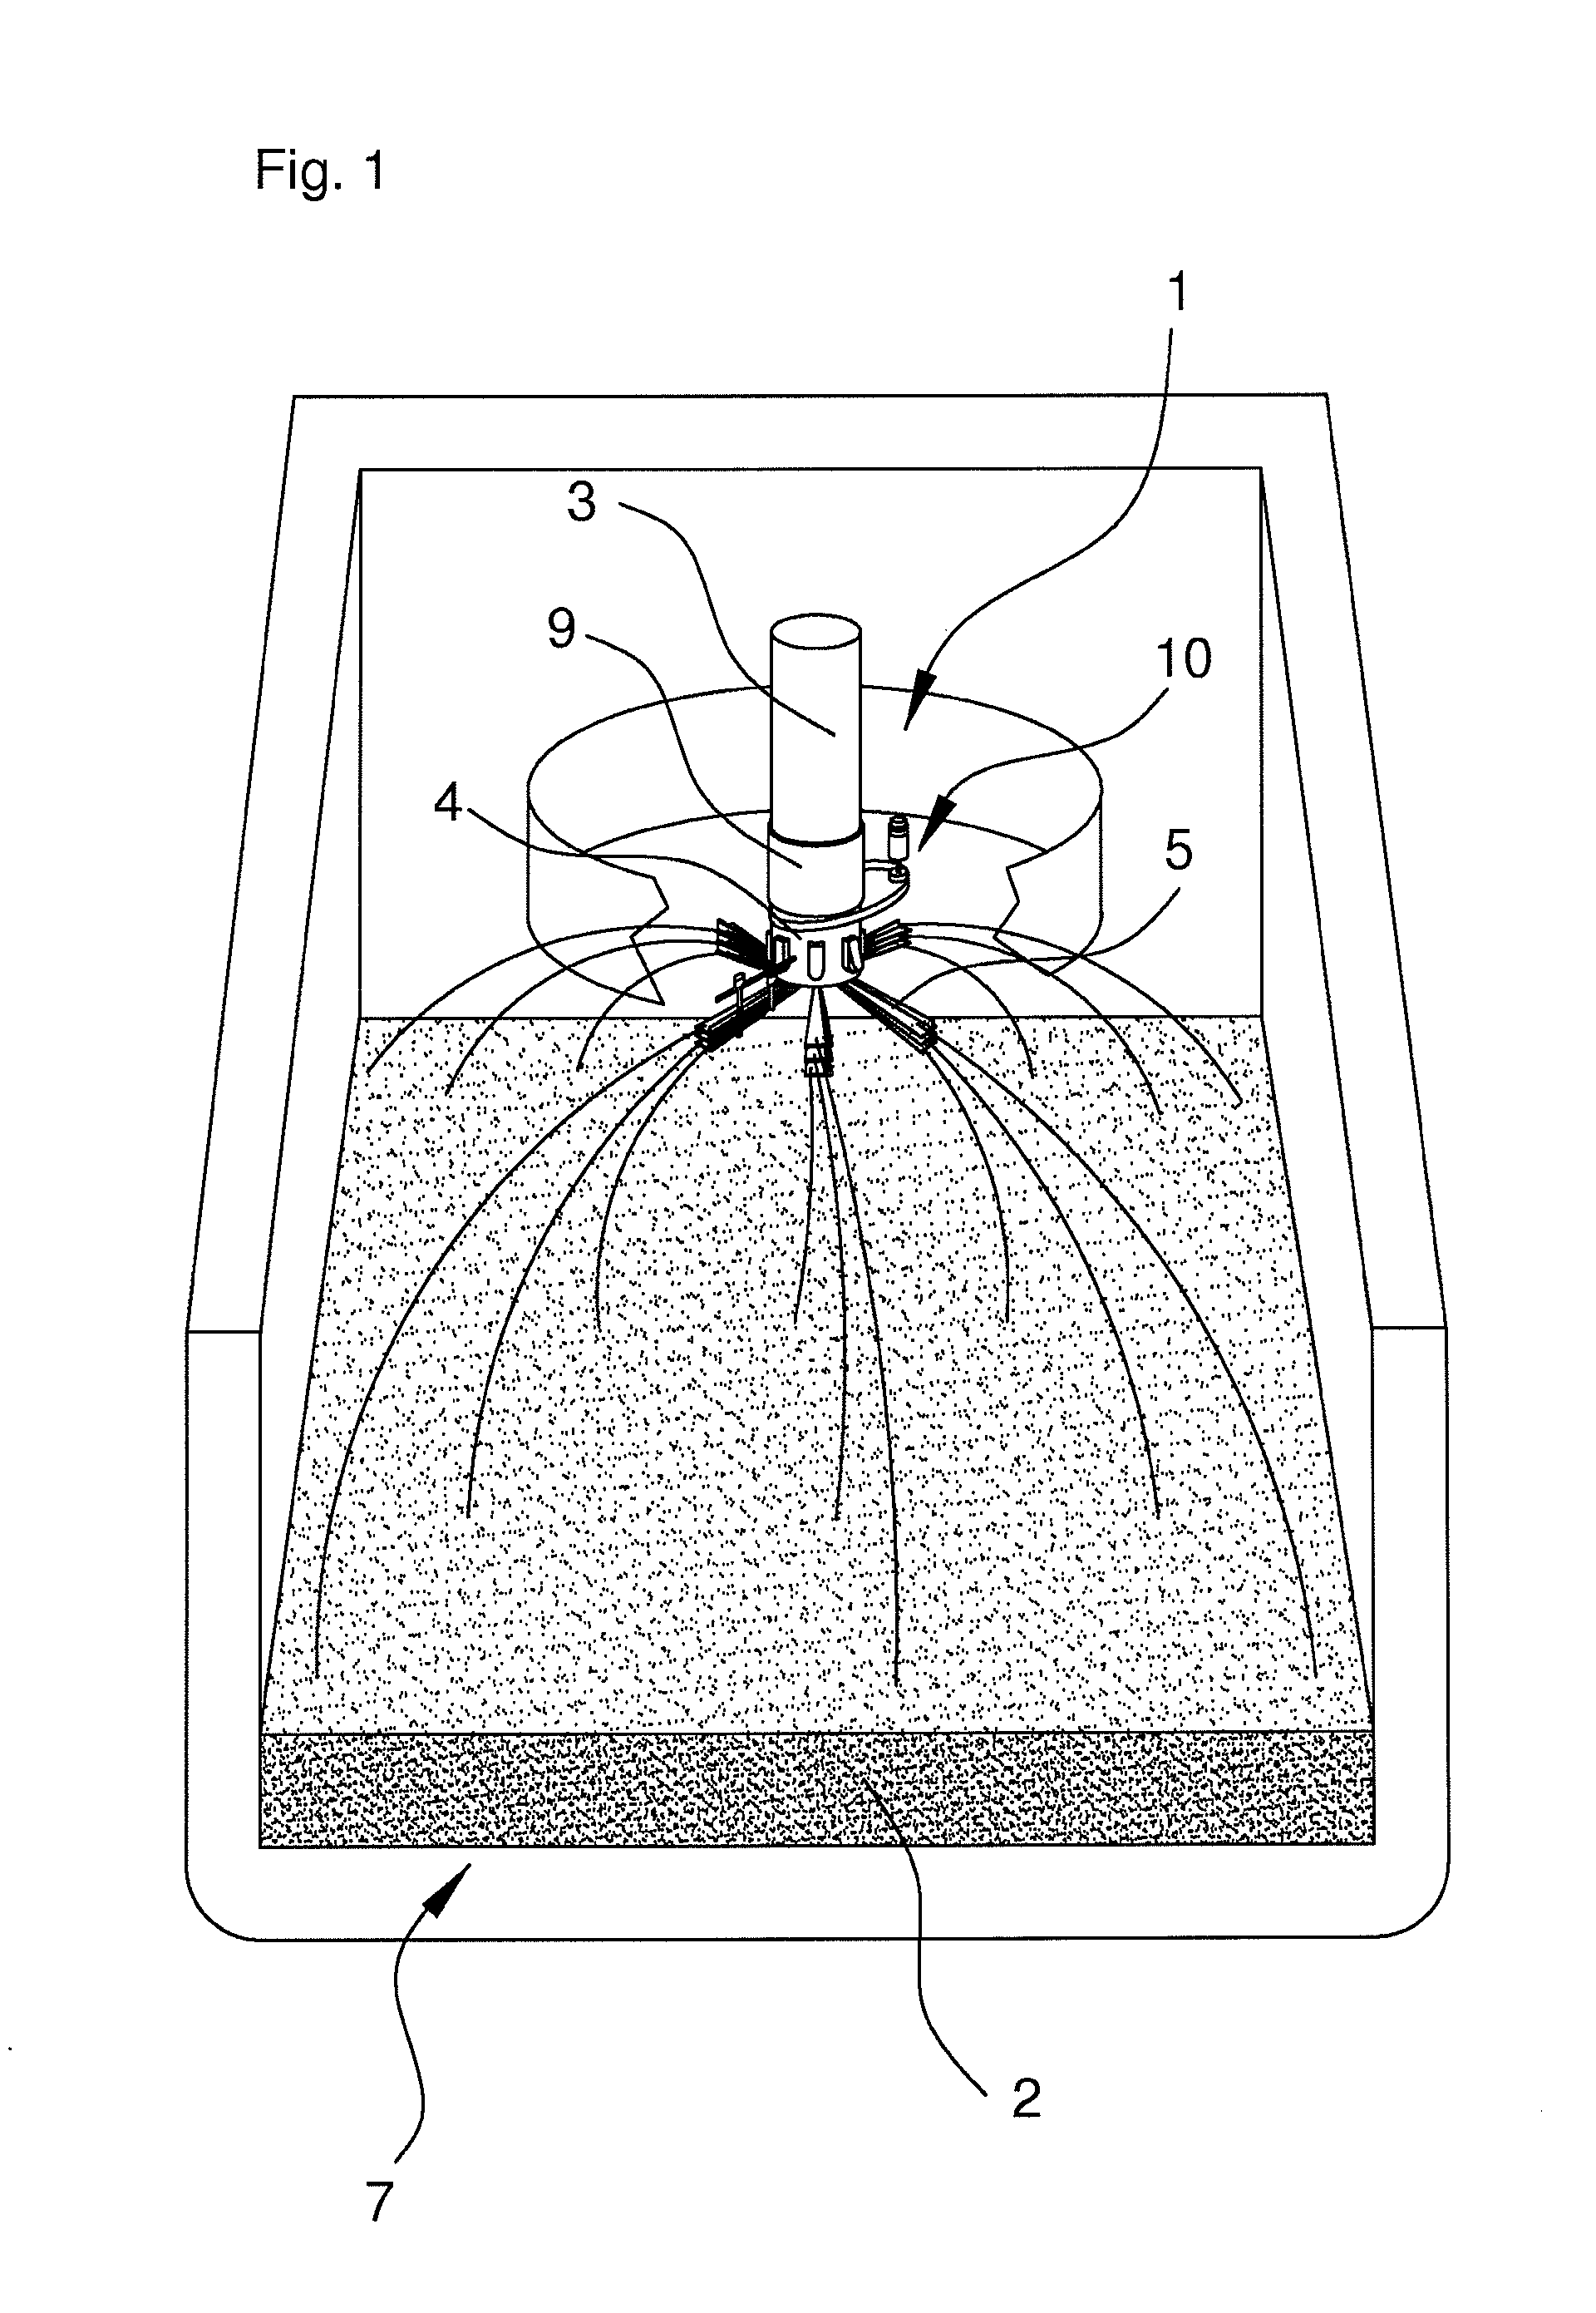 Device for densely loading a divided solid into a chamber